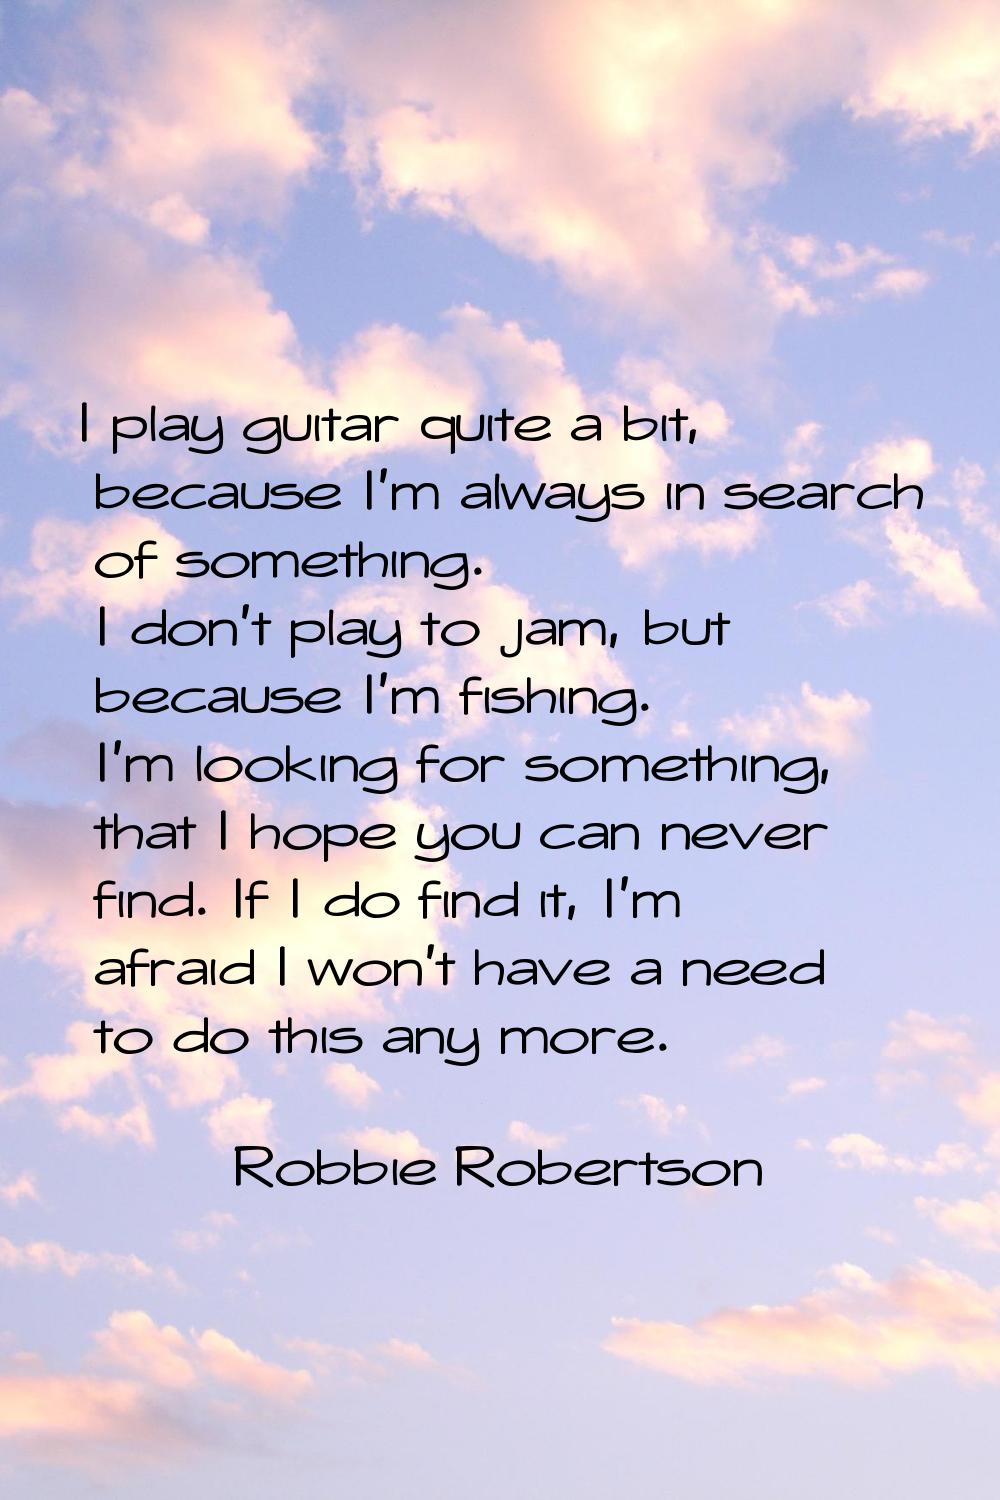 I play guitar quite a bit, because I'm always in search of something. I don't play to jam, but beca